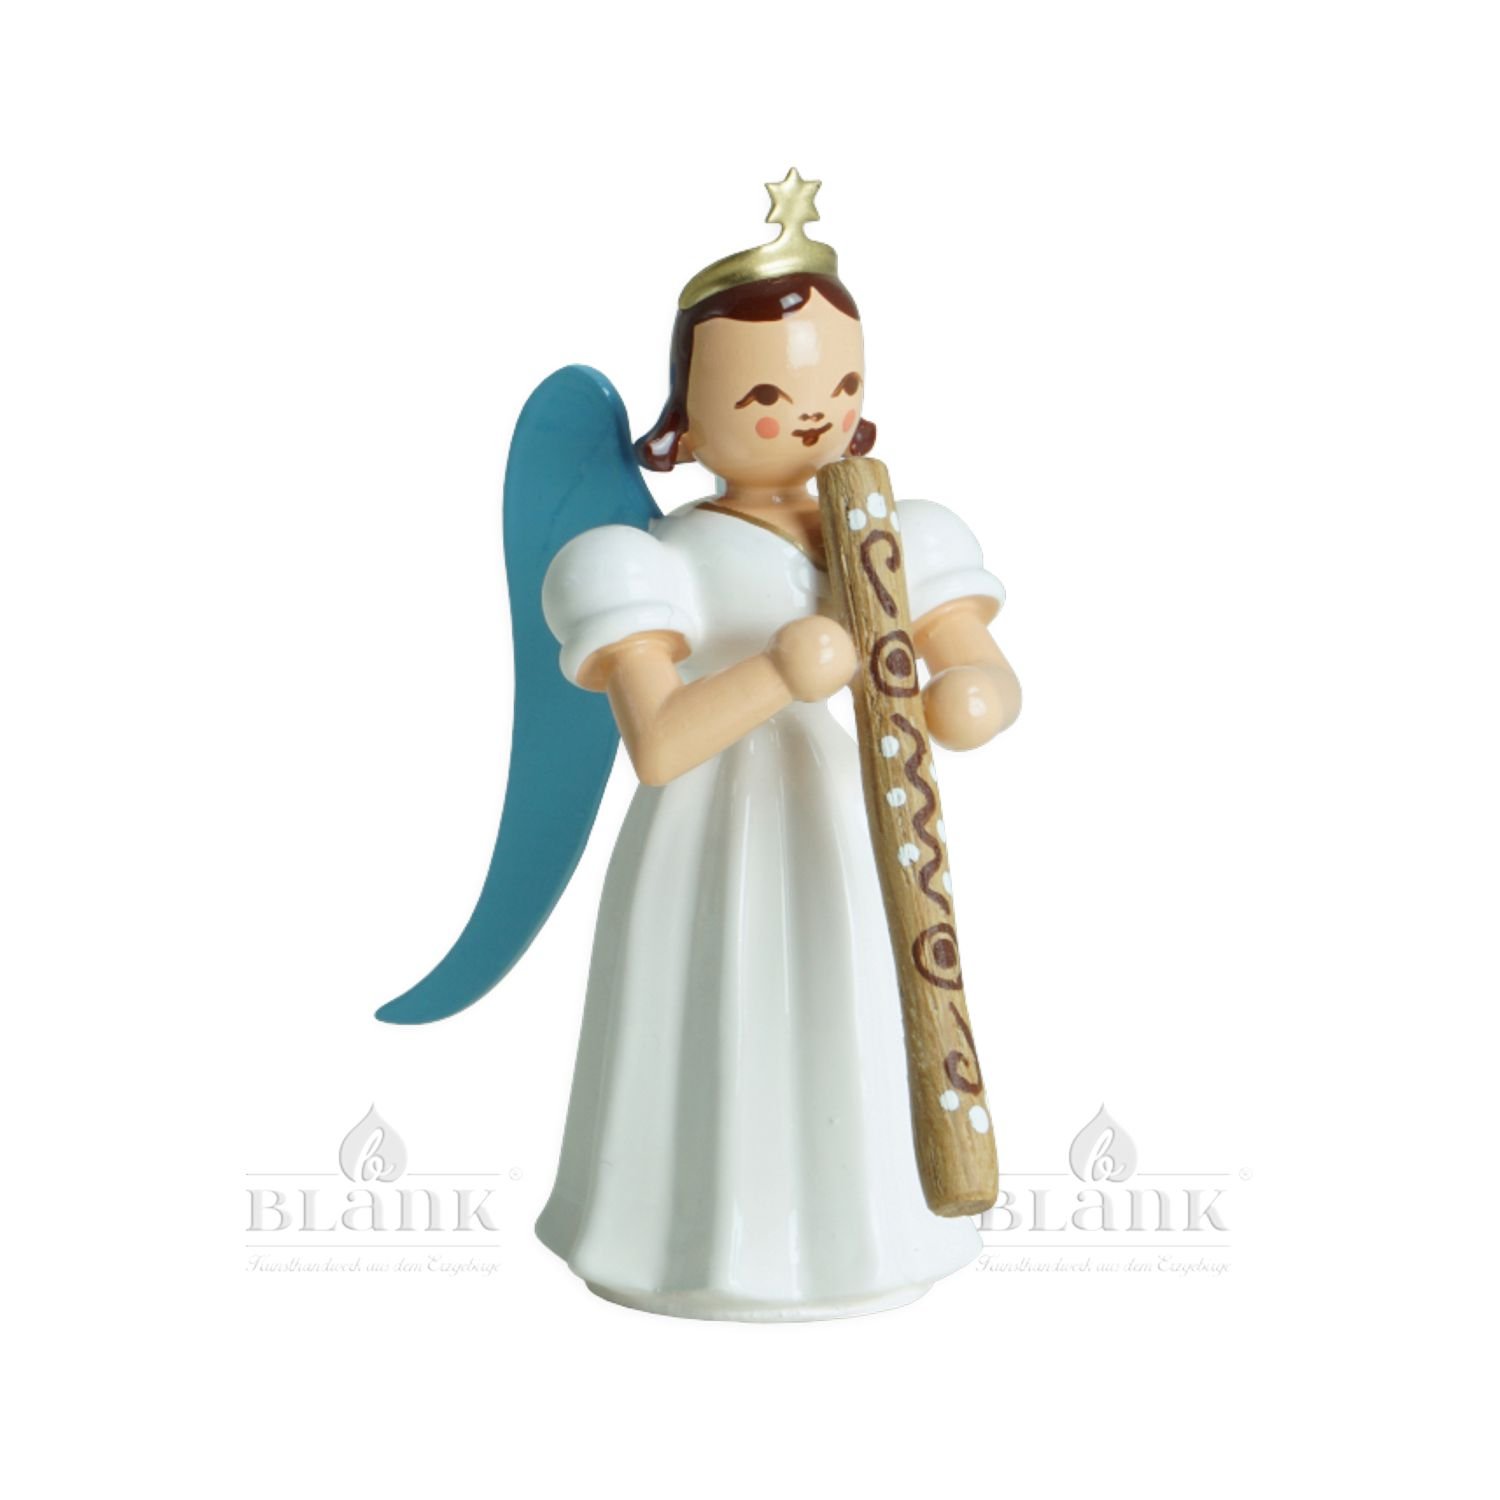 Blank long-robed angel with didgeridoo, colored